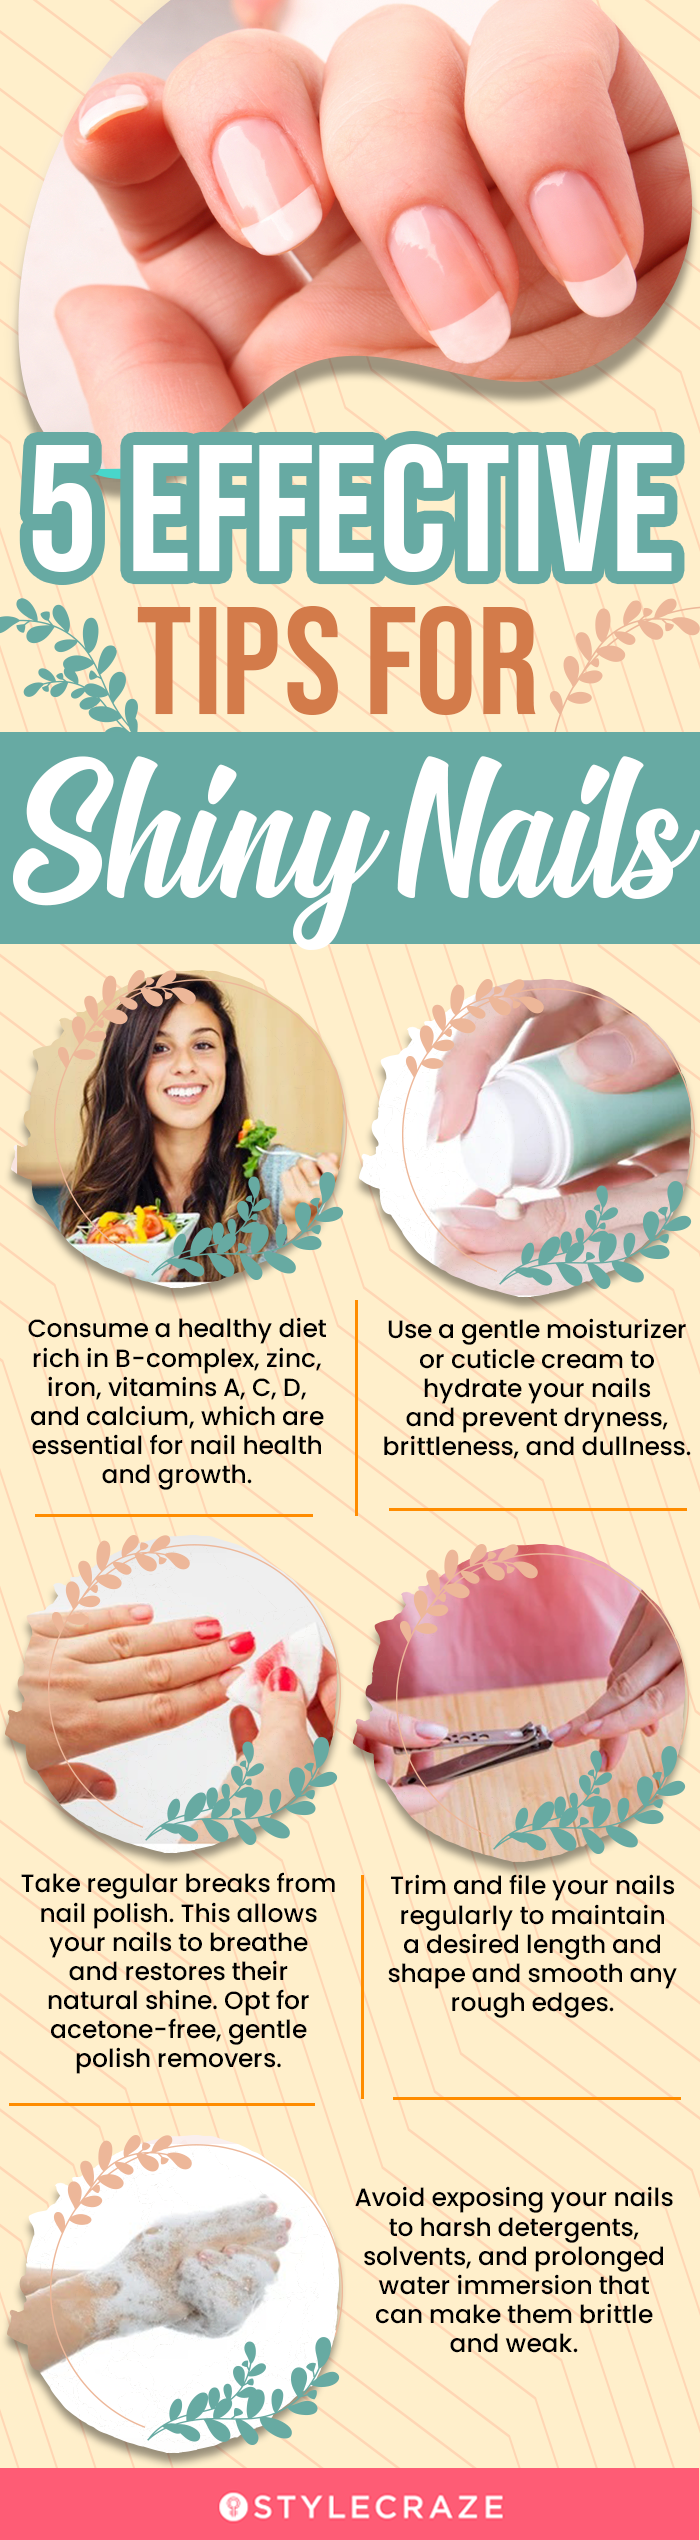 25 Easy And Natural Nail Care Tips And Tricks To Try At Home | Brittle  nails treatment, Brittle nails, Natural nail care